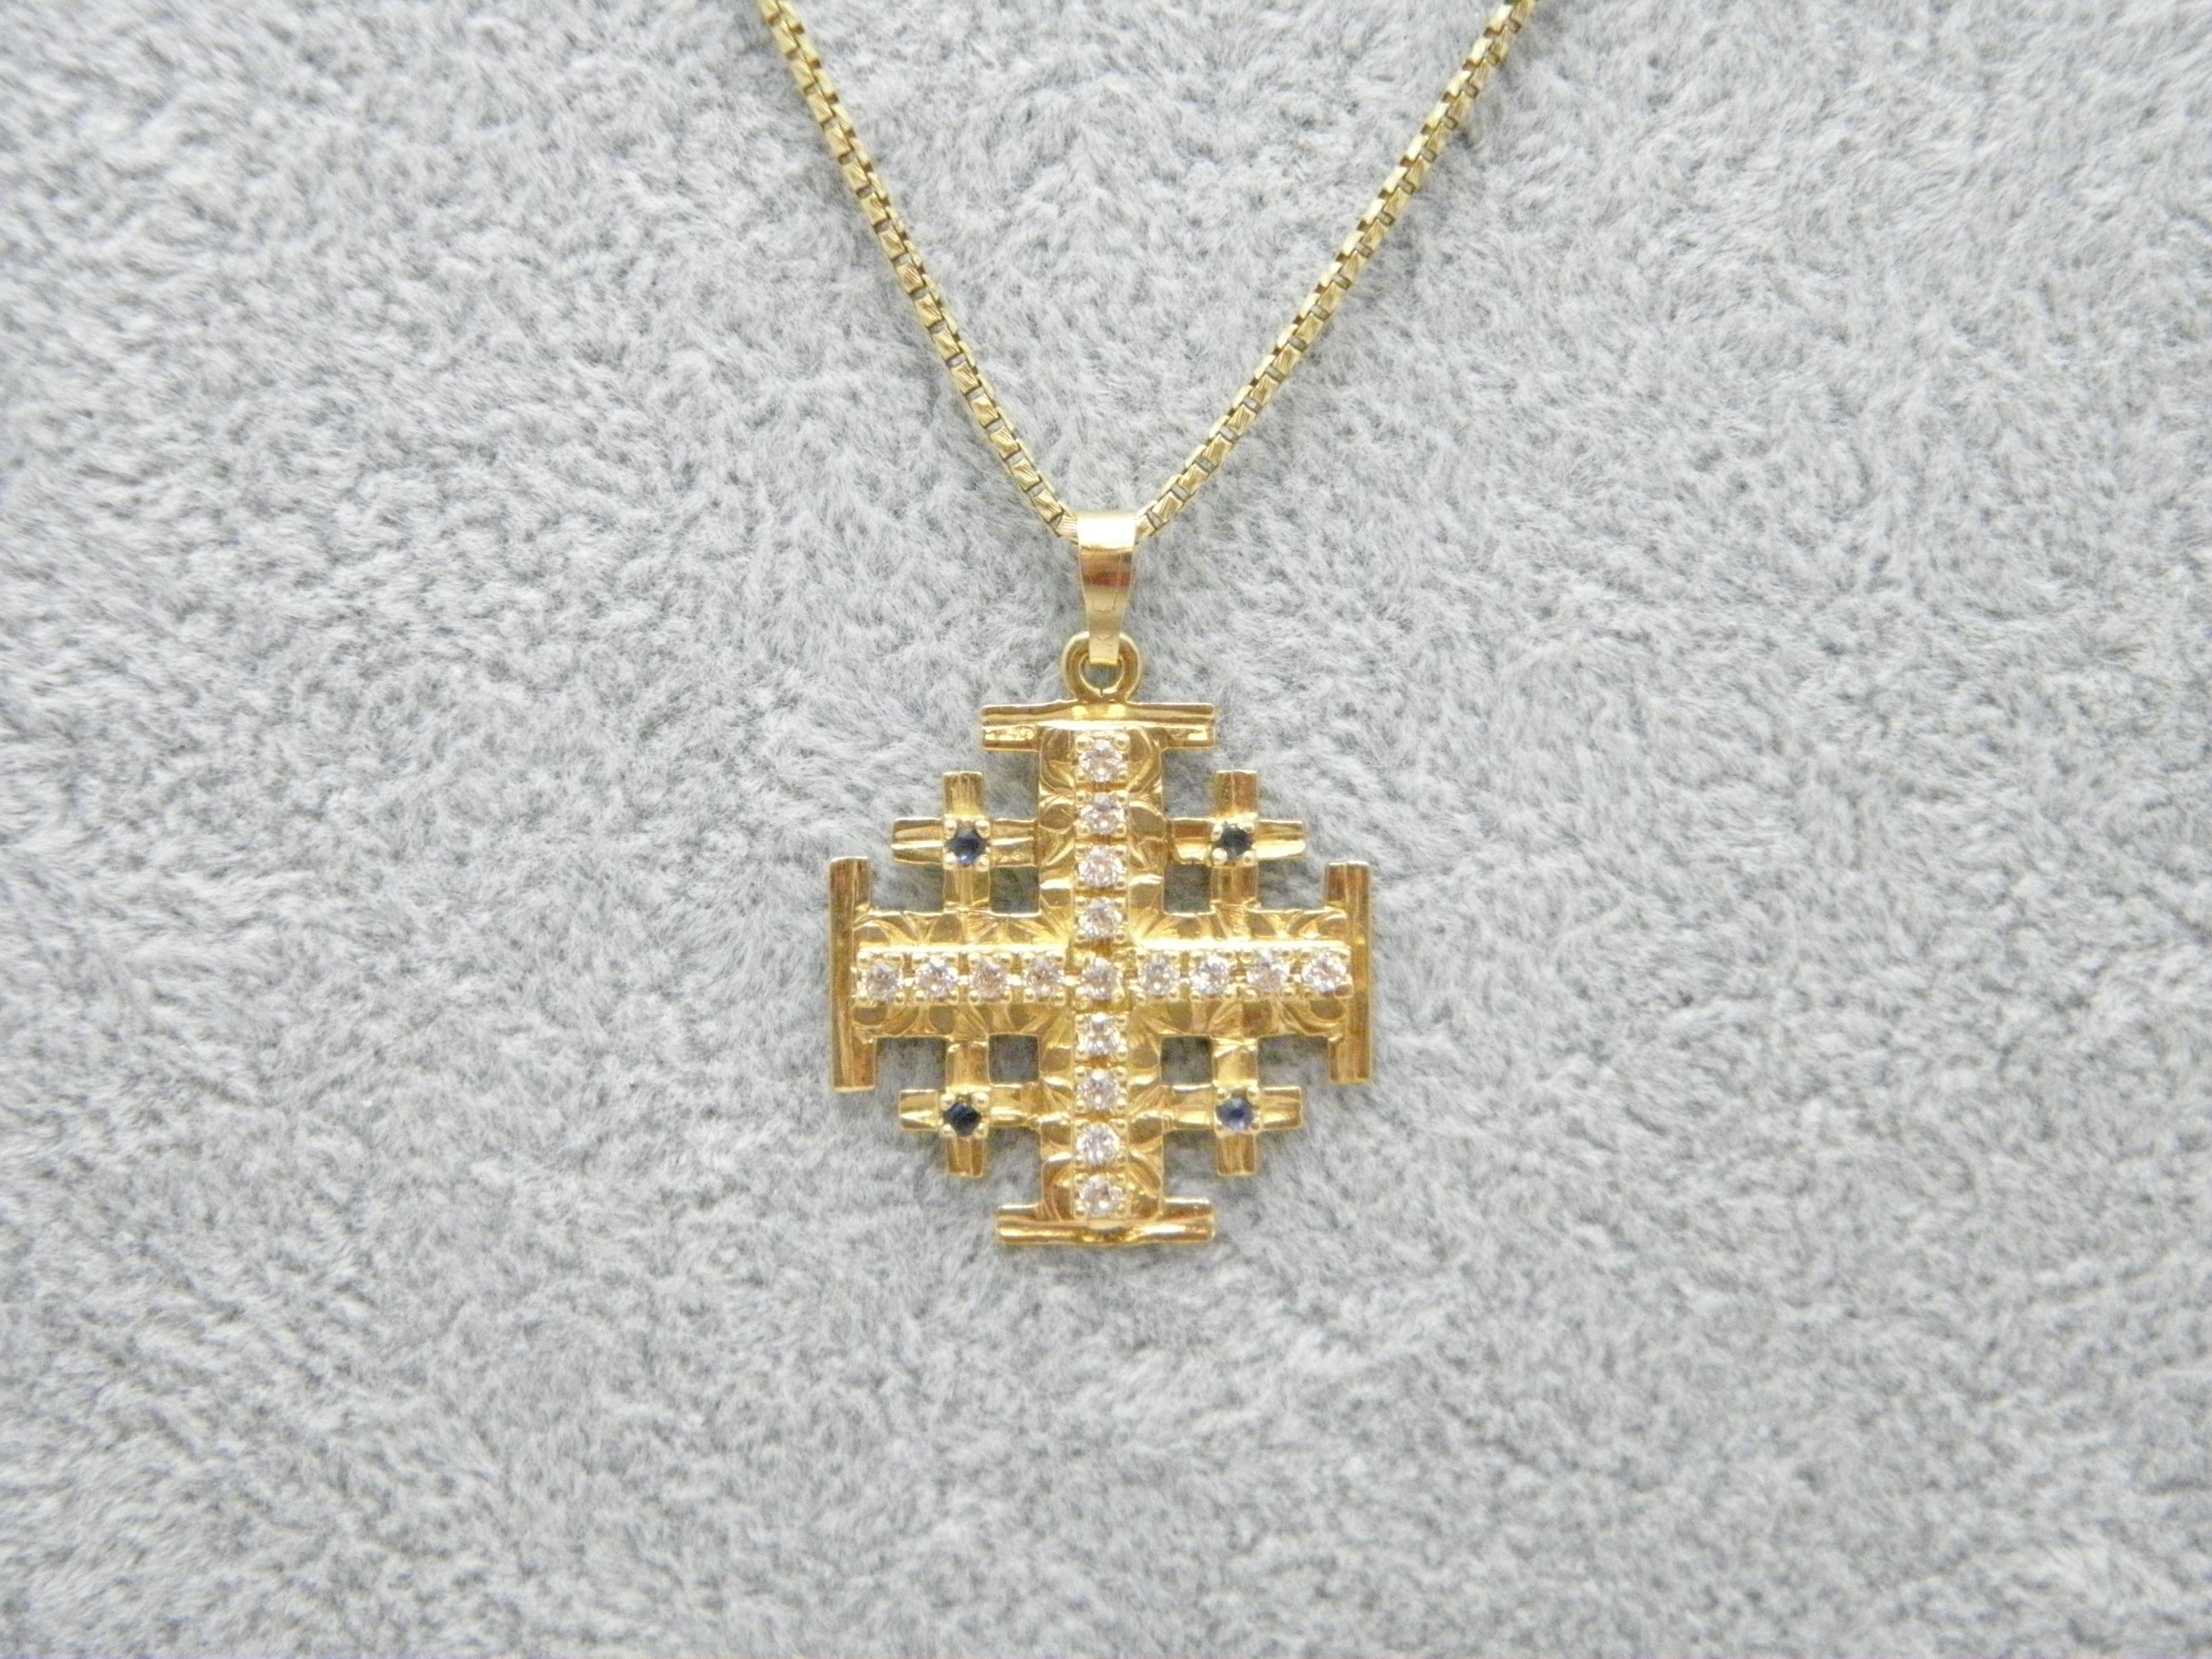 If you have landed on this page then you have an eye for beauty.

On offer is this gorgeous

14CT GOLD HEAVY SAPPHIRE SET JERUSALEM CROSS PENDANT NECKLACE

PENDANT DESCRIPTION
DETAILS
Material: Solid 14ct (585/000) yellow gold
Style: Multi prong